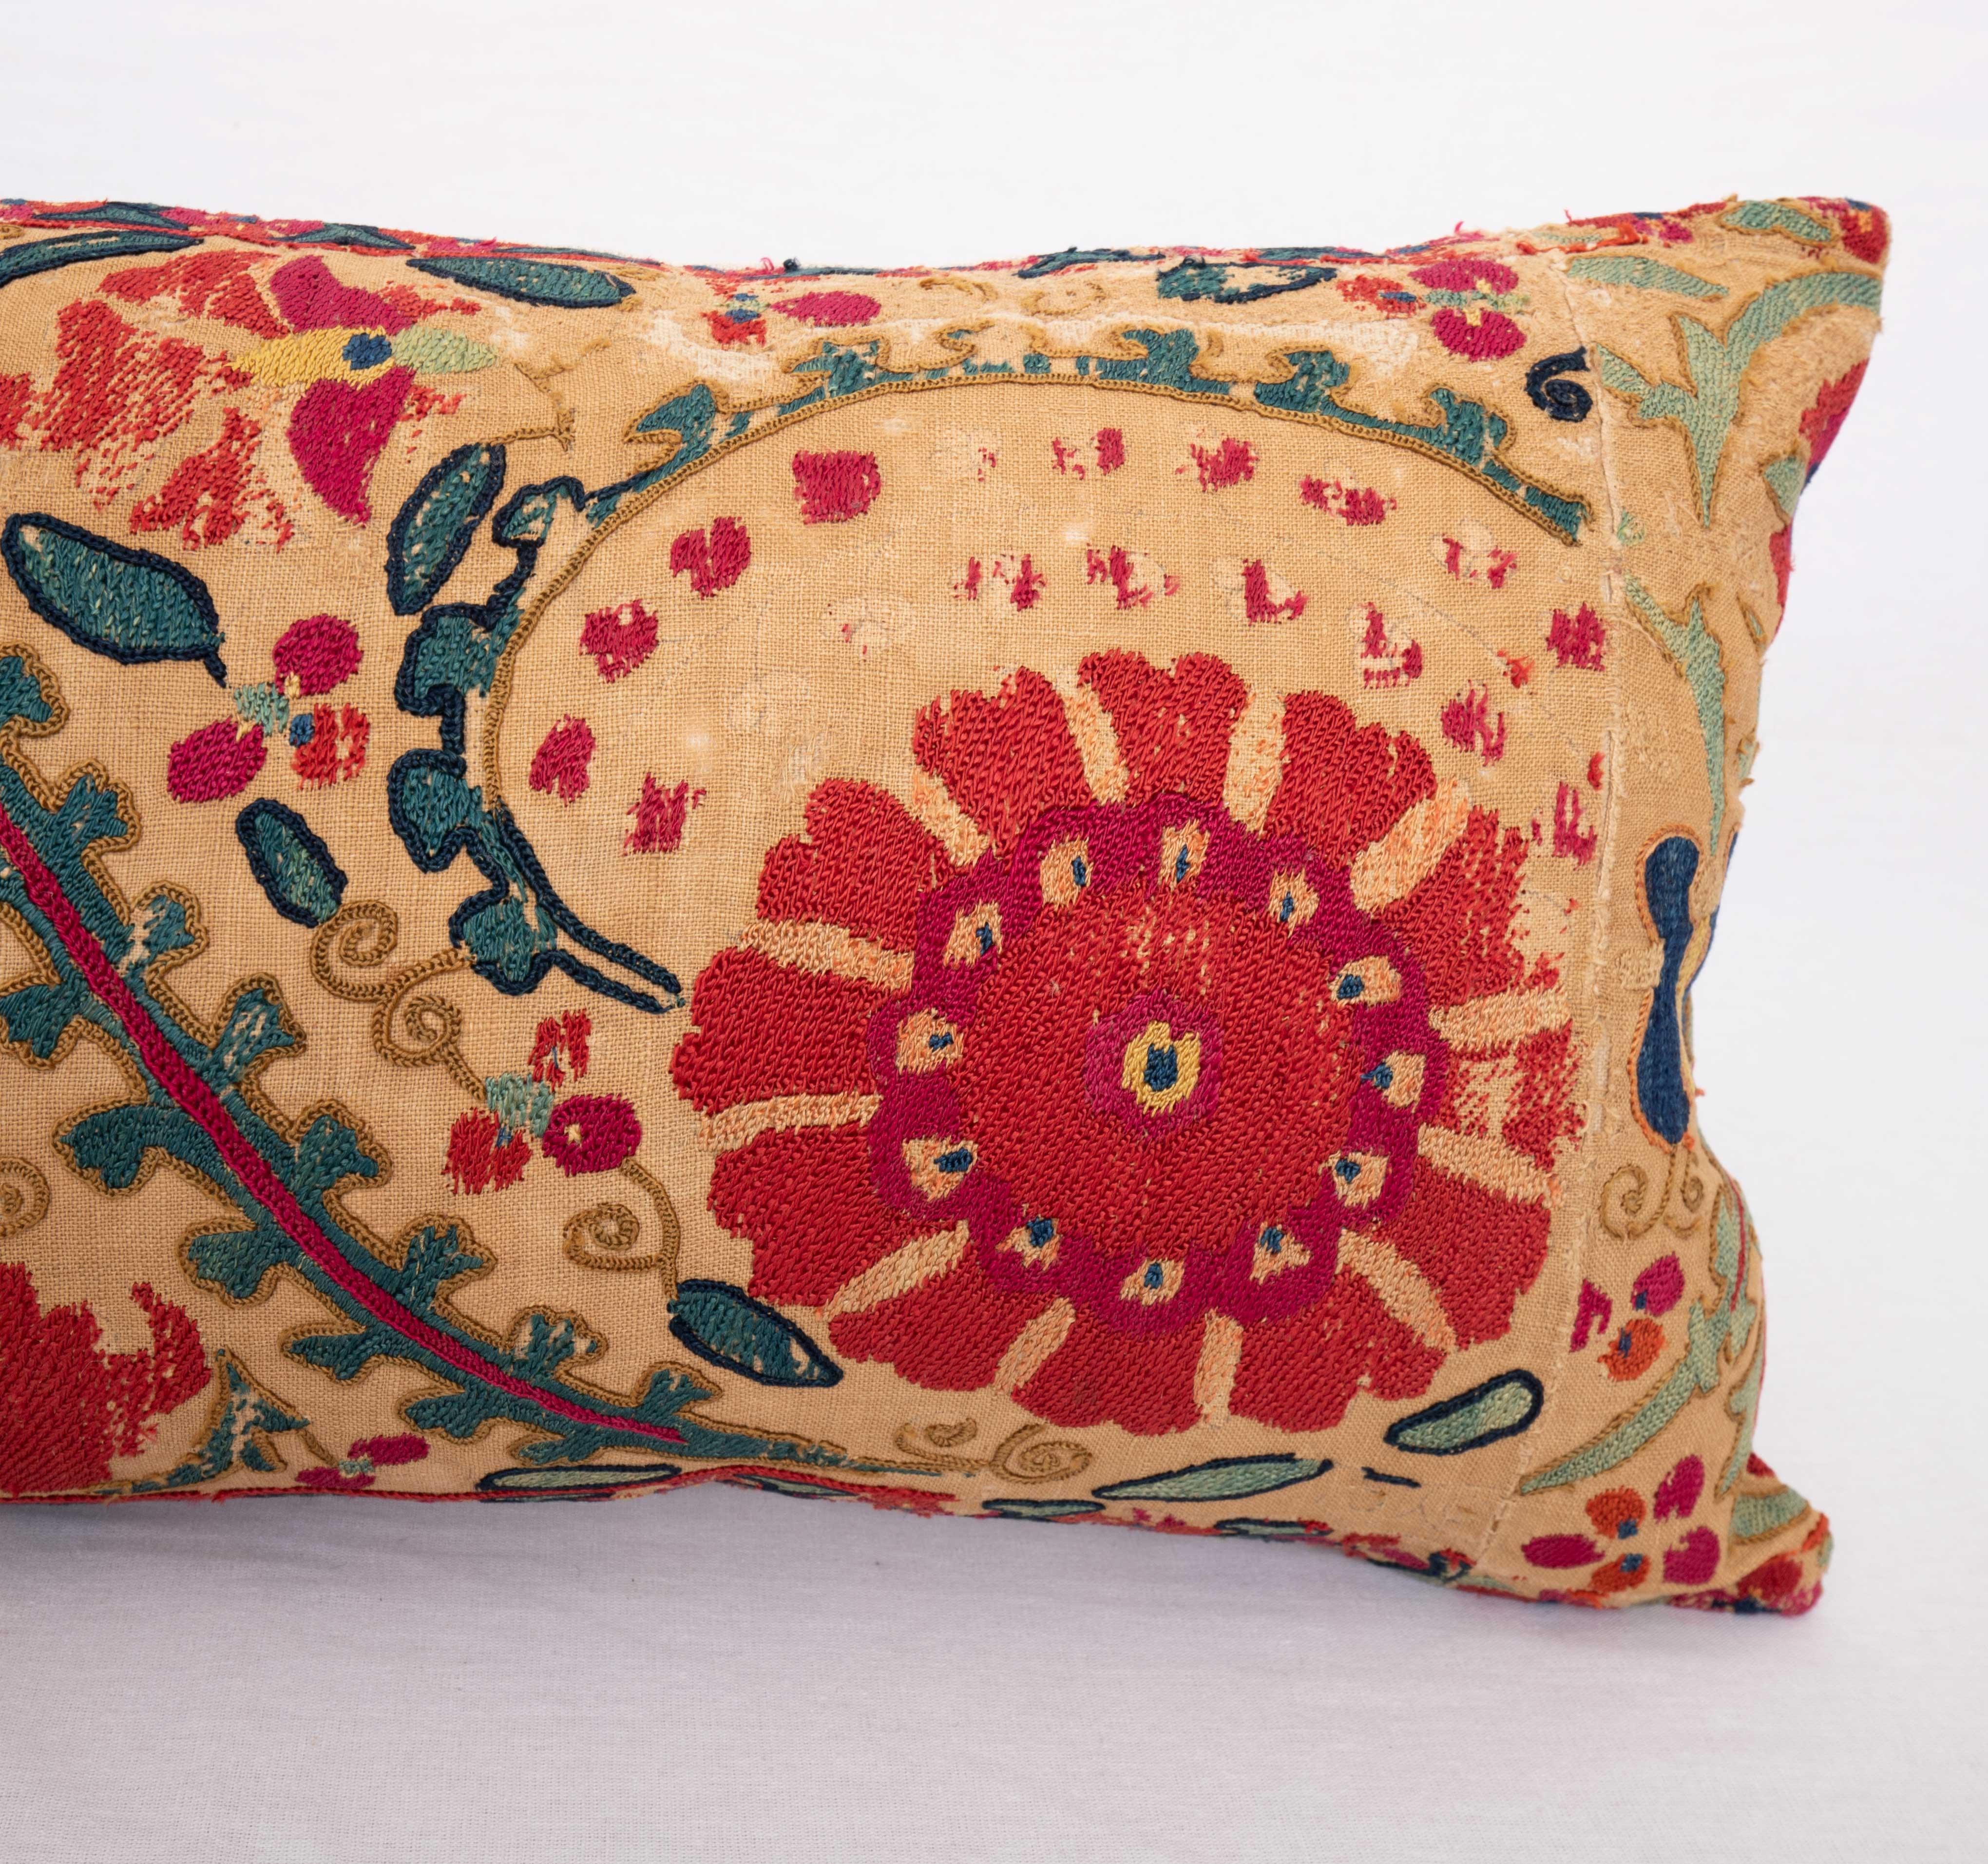 Embroidered Suzani Pillow Case made from an Antique suzani Fragment, 19th C.